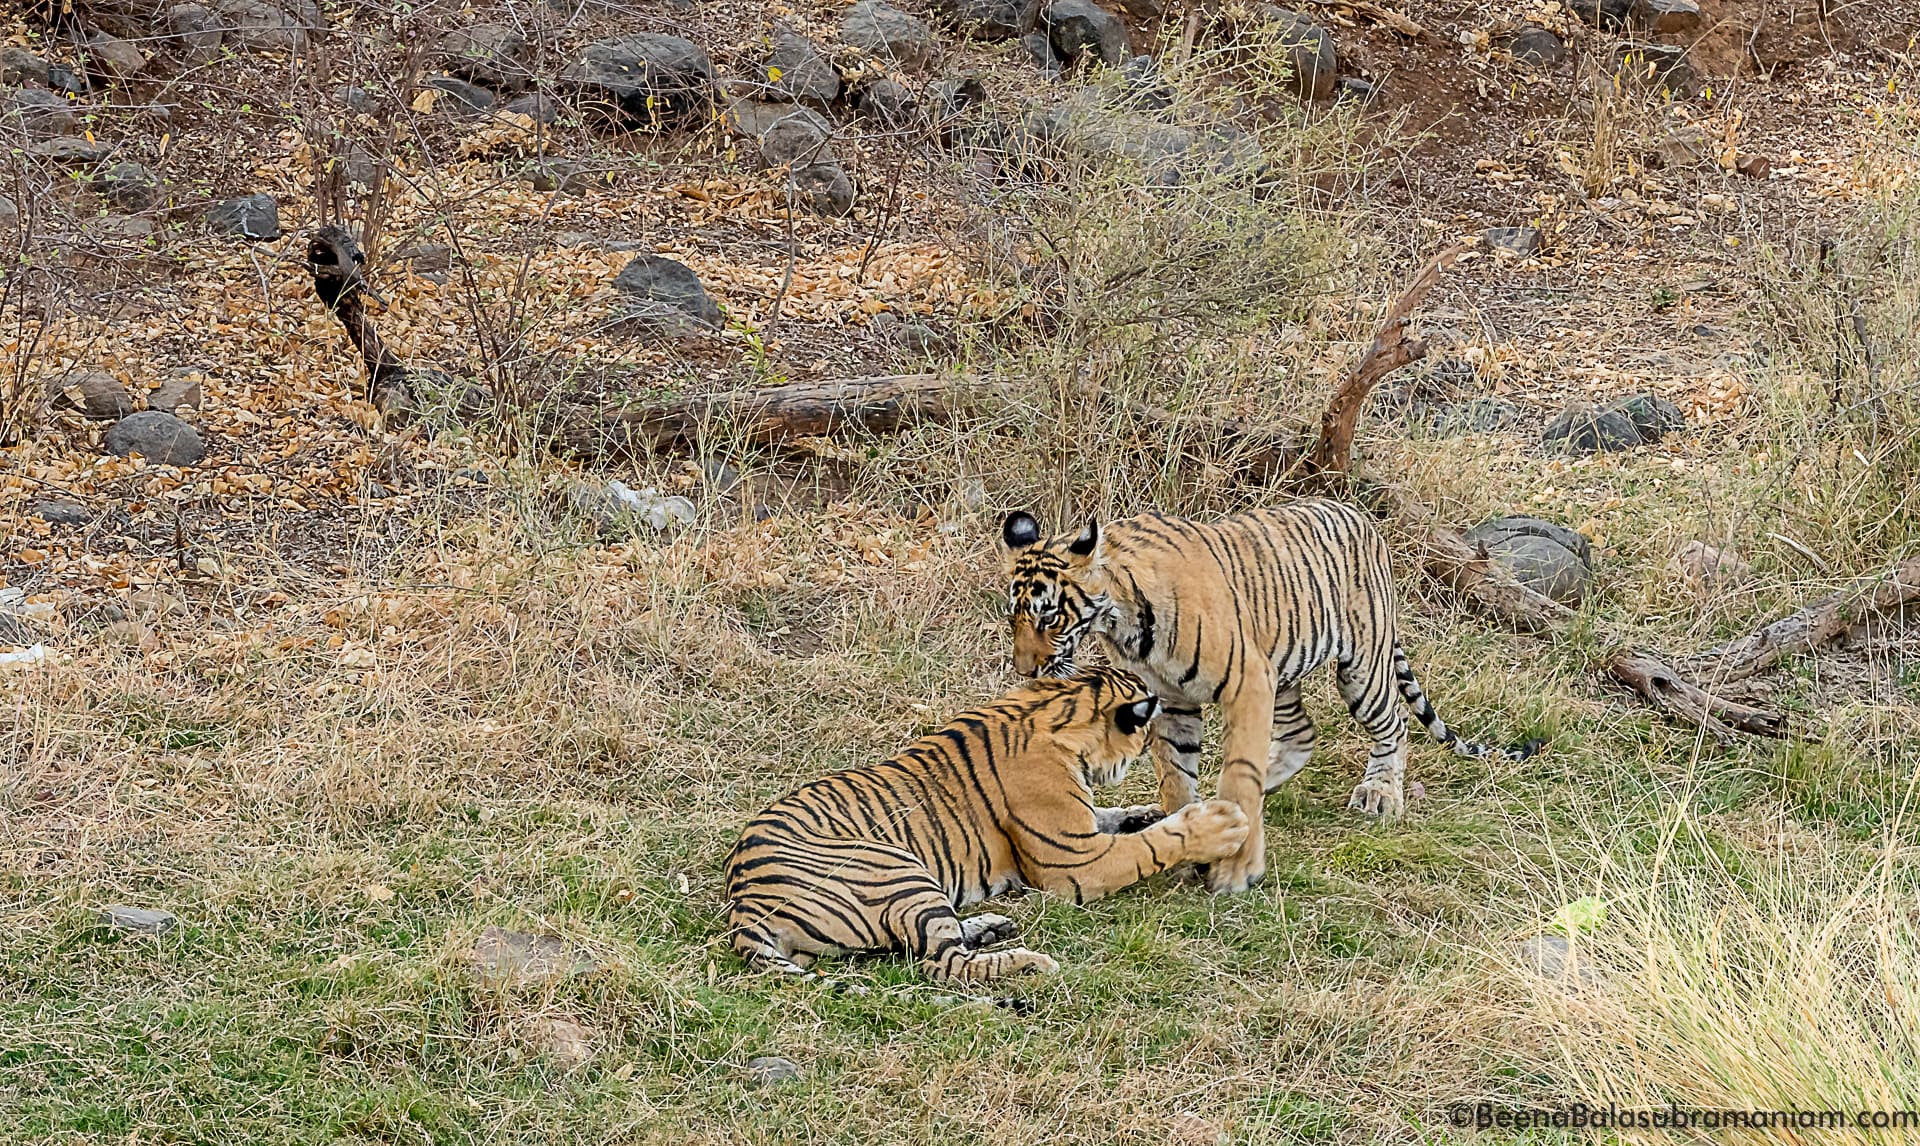 Cubs of T 8 Ranthambore National Park- 2018